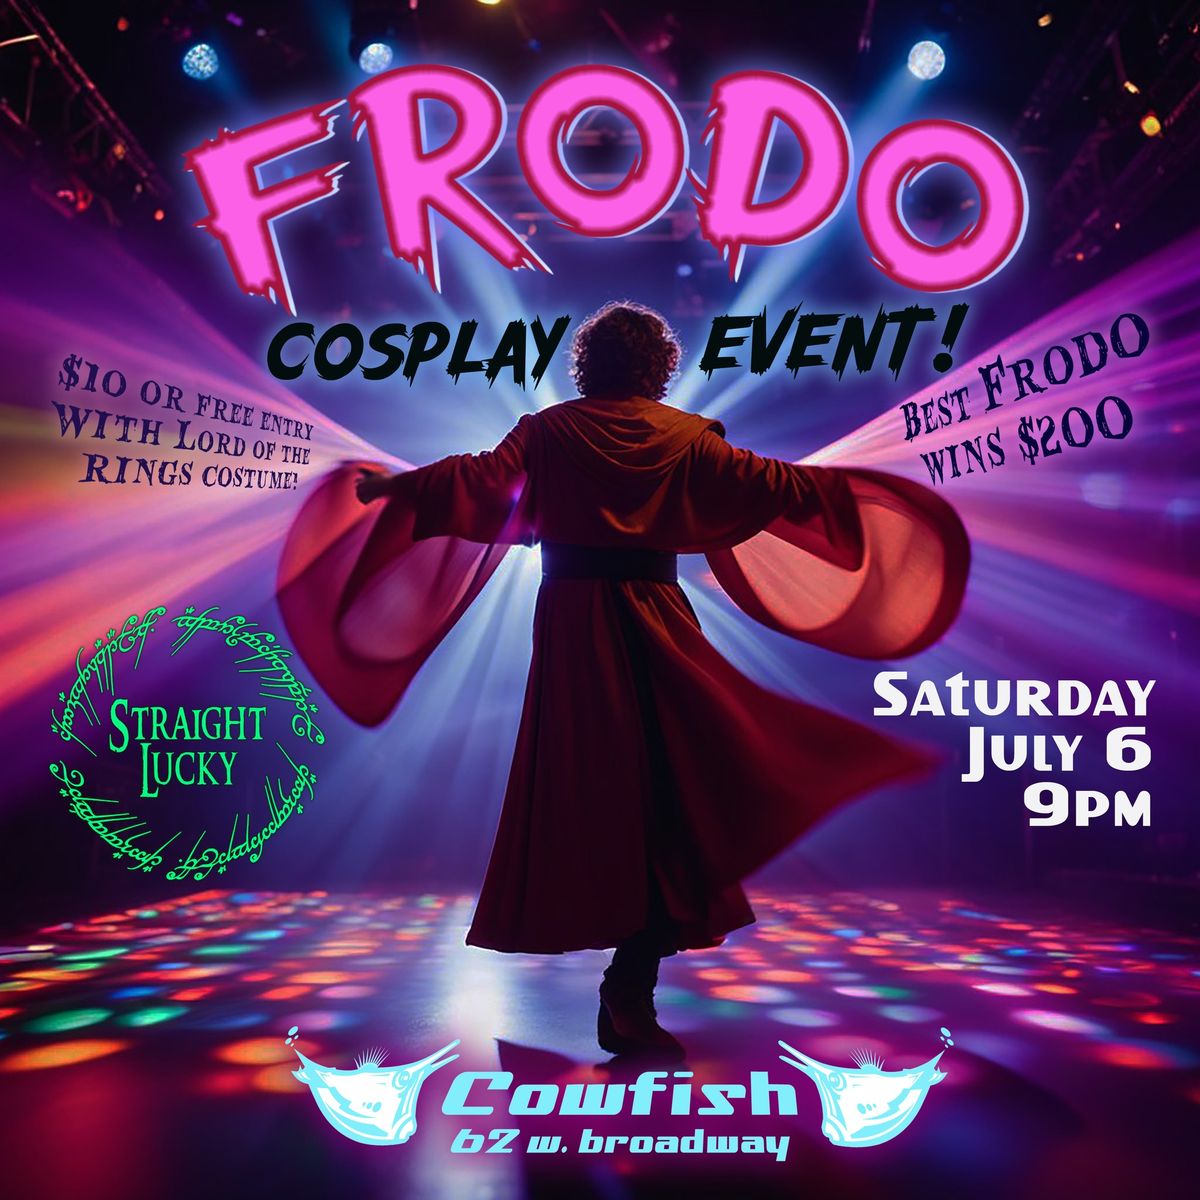 ~~FRODO~~Free Entry with Lord of the Rings Cosplay! DJ Straight Lucky! Best Frodo wins $200 cash!